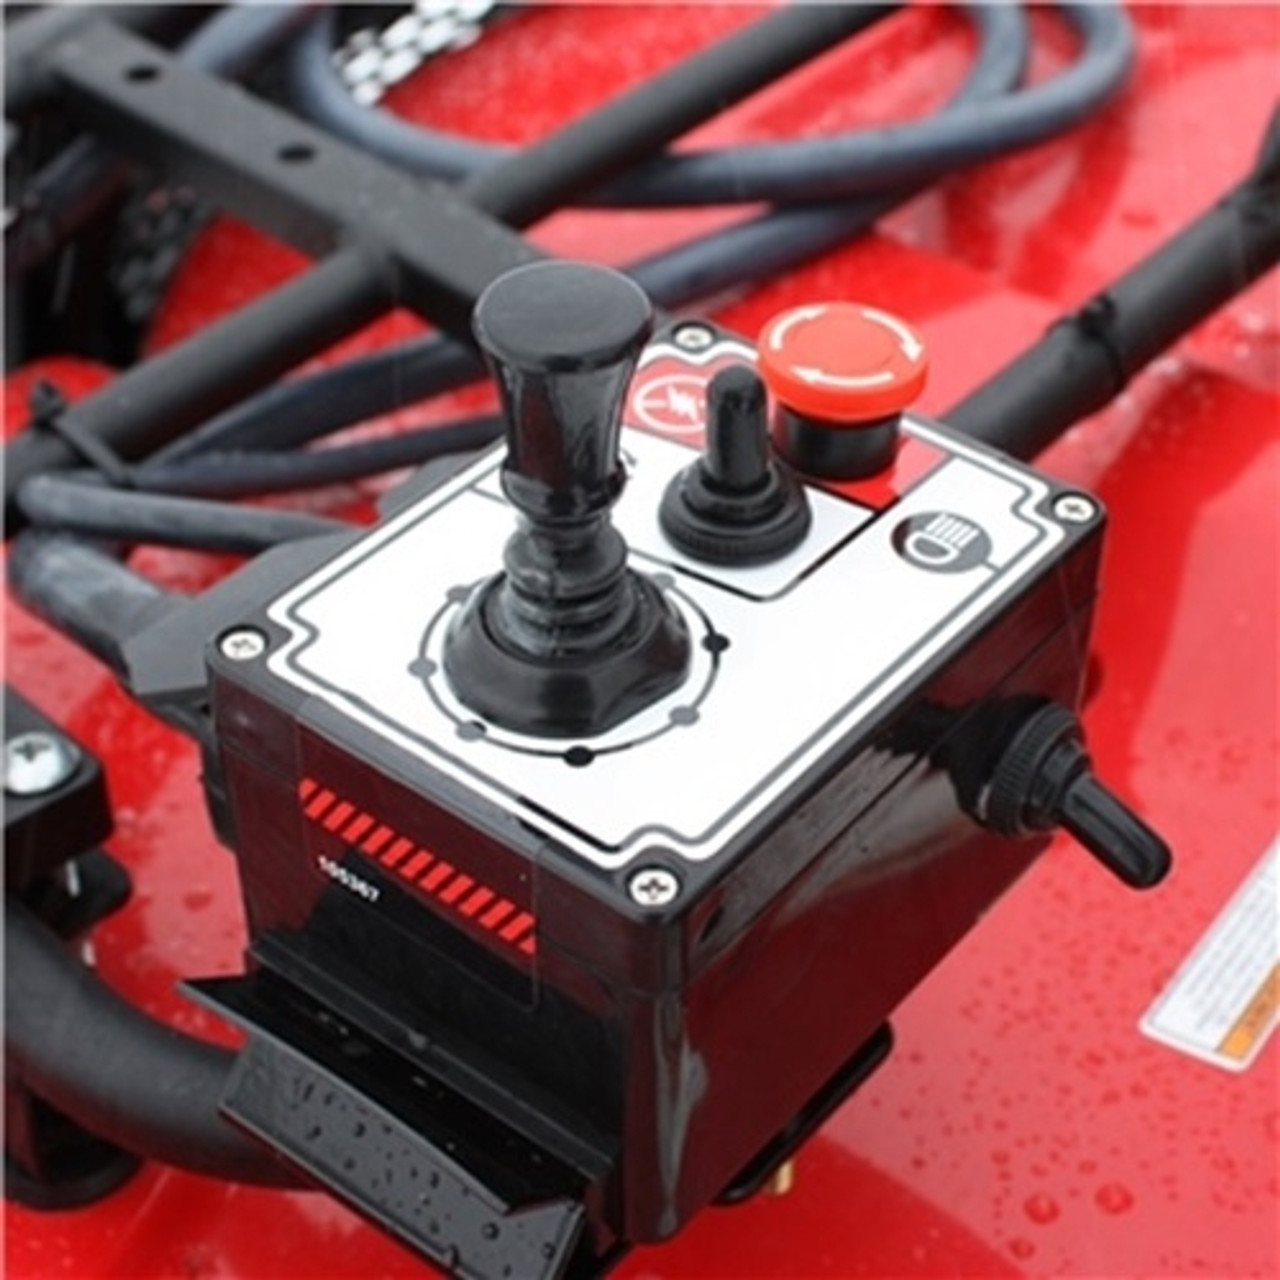 A close-up image of the electrical control box that comes with each Arctic Cat Prowler by Bercomac, including clutch, chute, and engine controls.